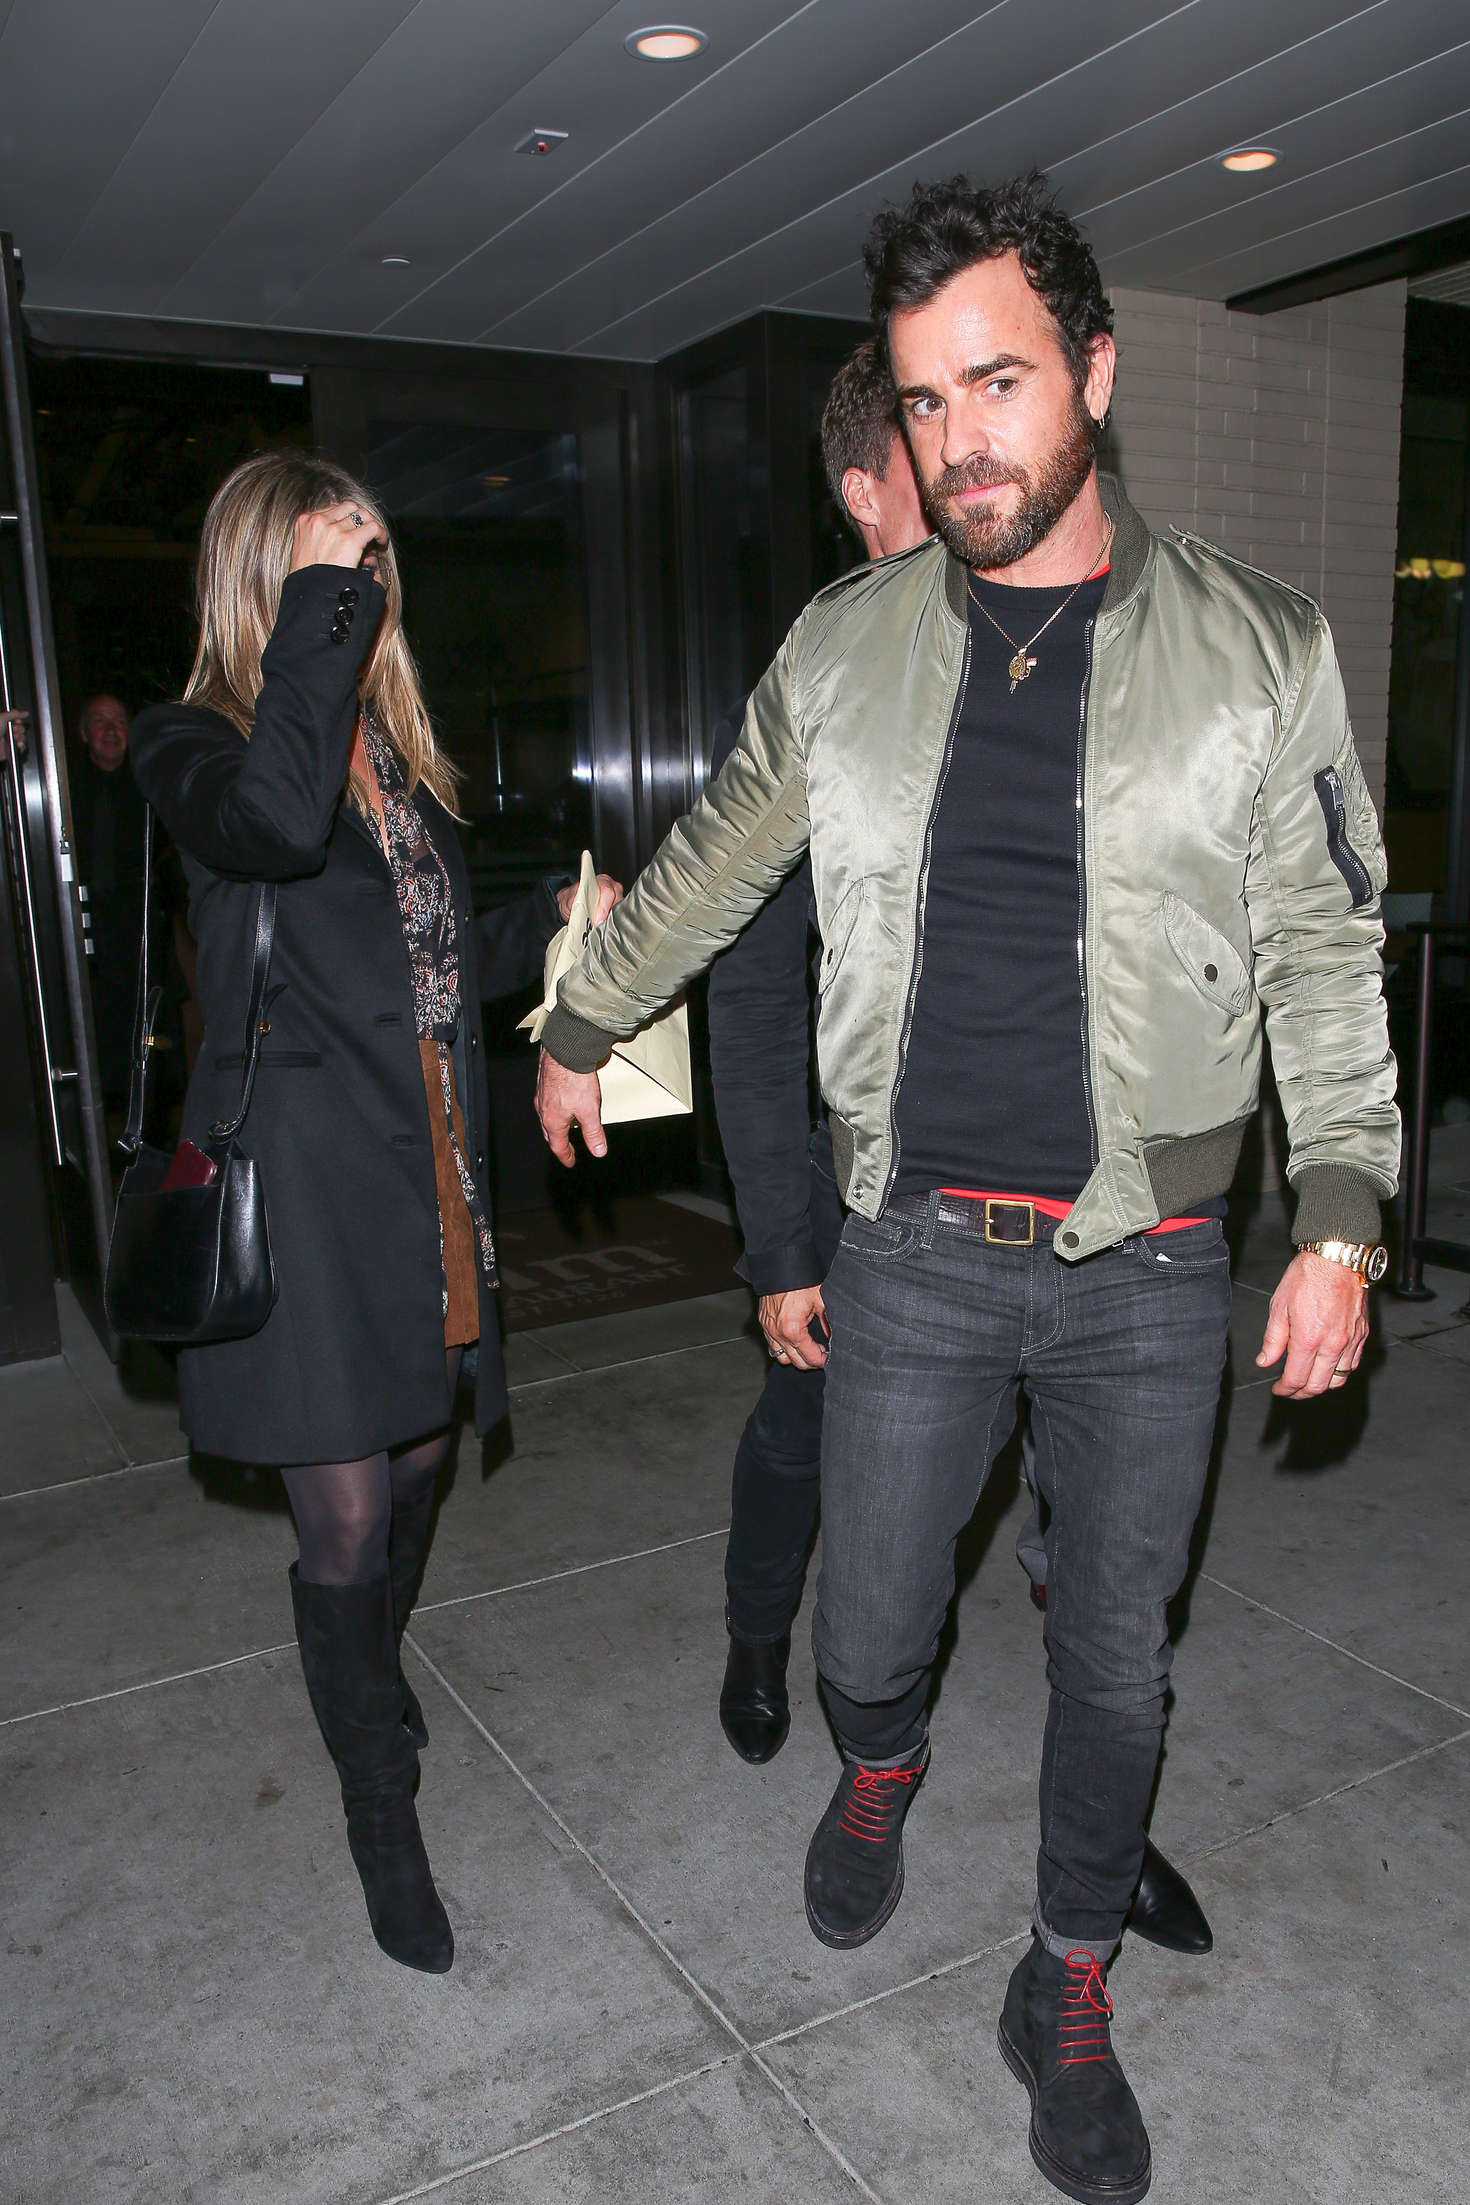 Jennifer Aniston at The Palm Restaurant in Beverly Hills